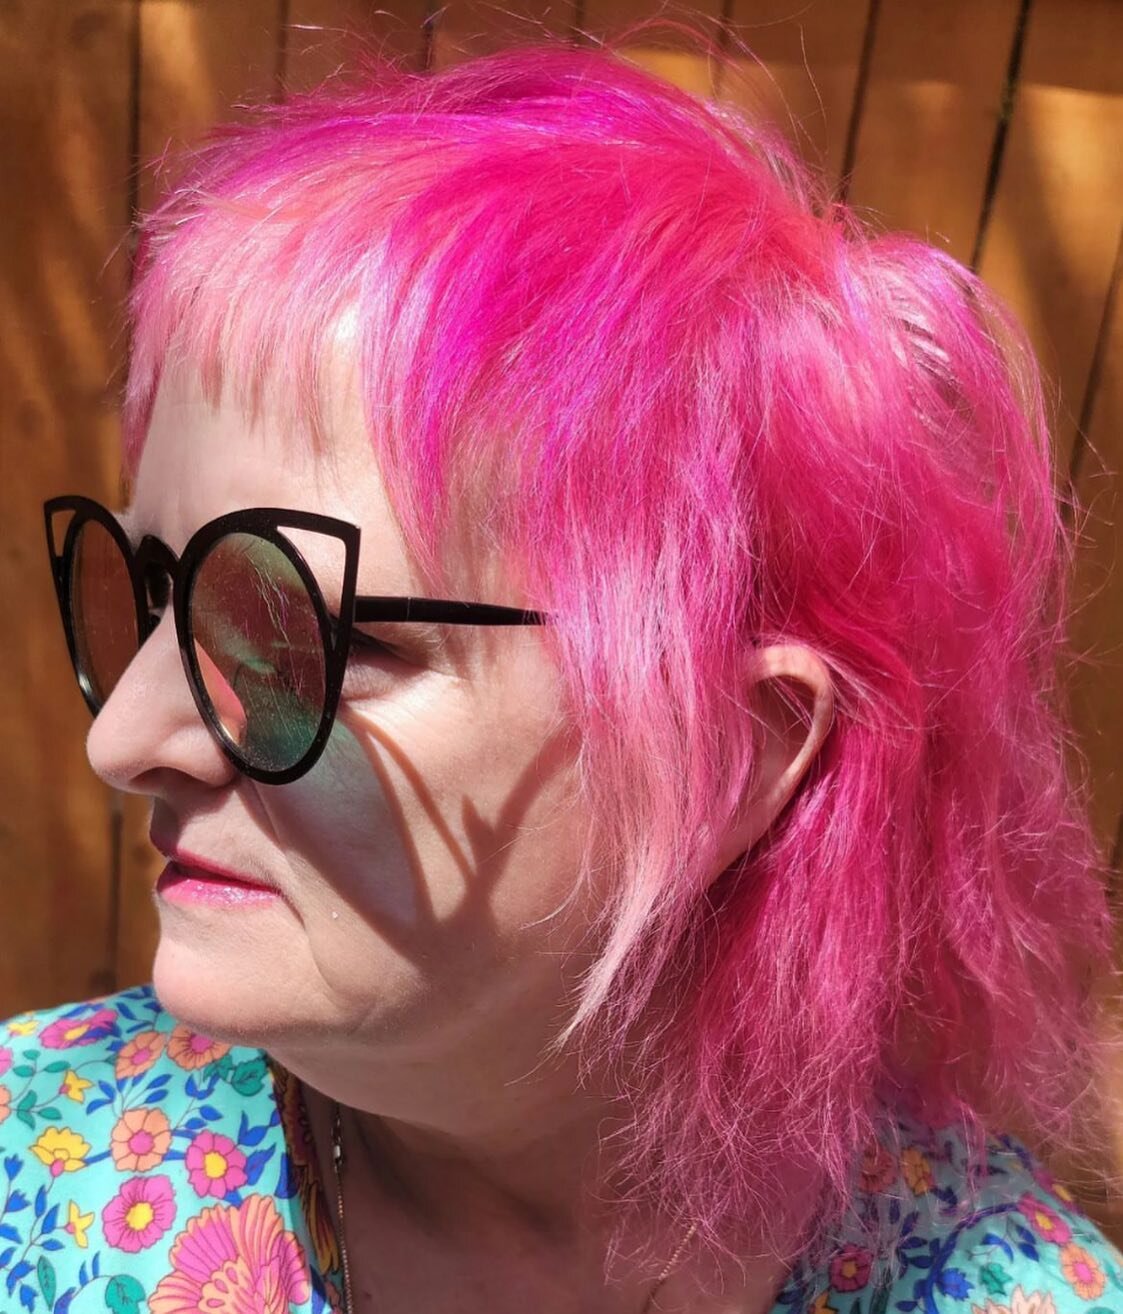 💓 Coolest mom around 💓 Such totally fun hair by Hailey @haileyhairmagic ✨💓 Booking now💓  @vainwestseattle vain.com or call 2065352595 
@vainbeautyworld @wsbestseattle @westseattlejunction #westseattle #westseattlejunction #westseattlelocal #wests